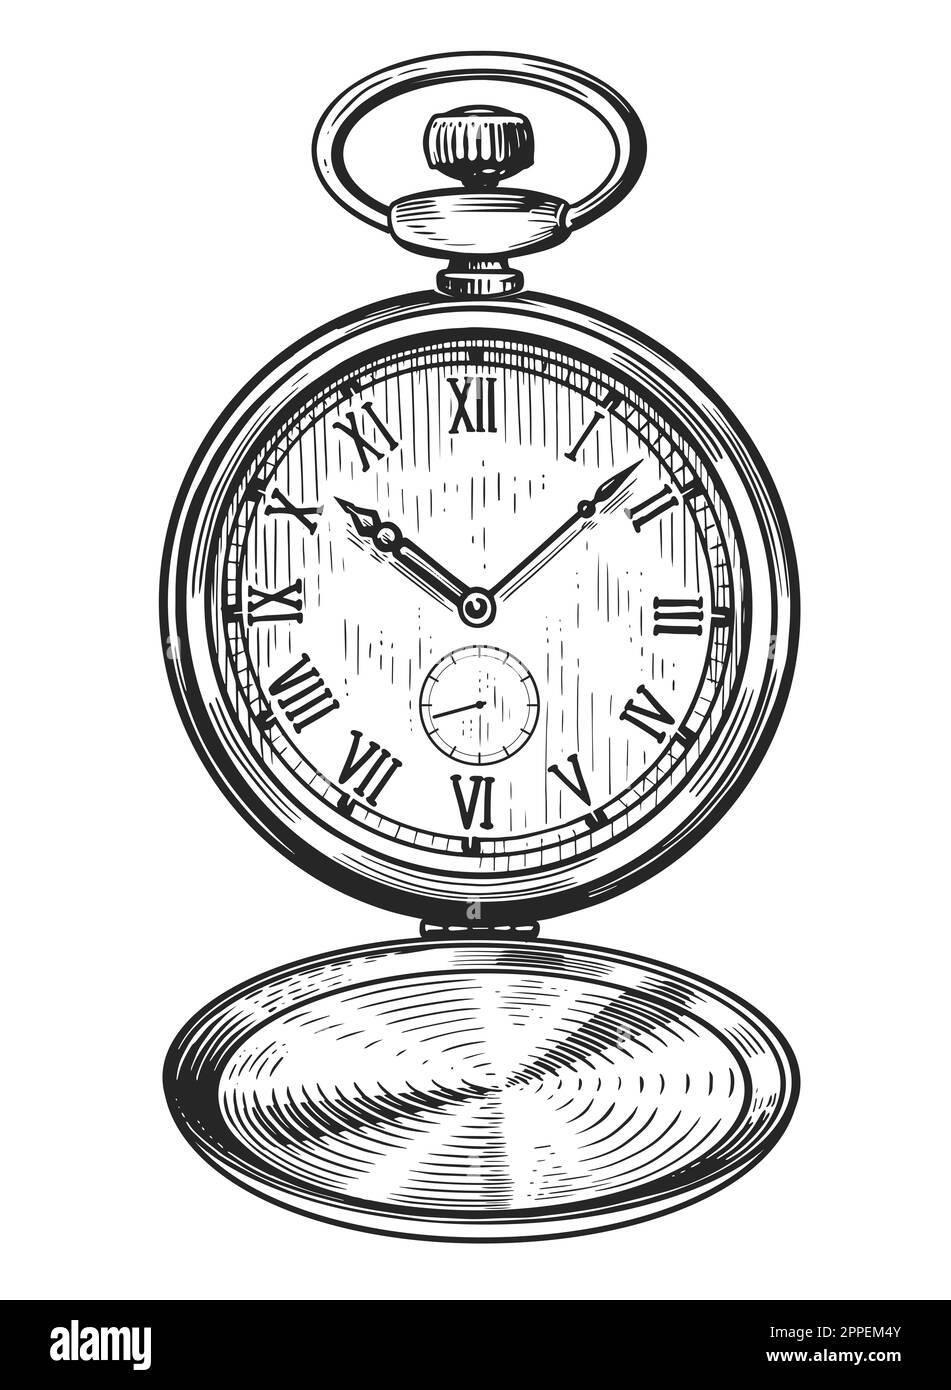 Mechanical classic pocket watch. Antique clock in old engraving style. Hand-drawn vintage sketch illustration Stock Photo